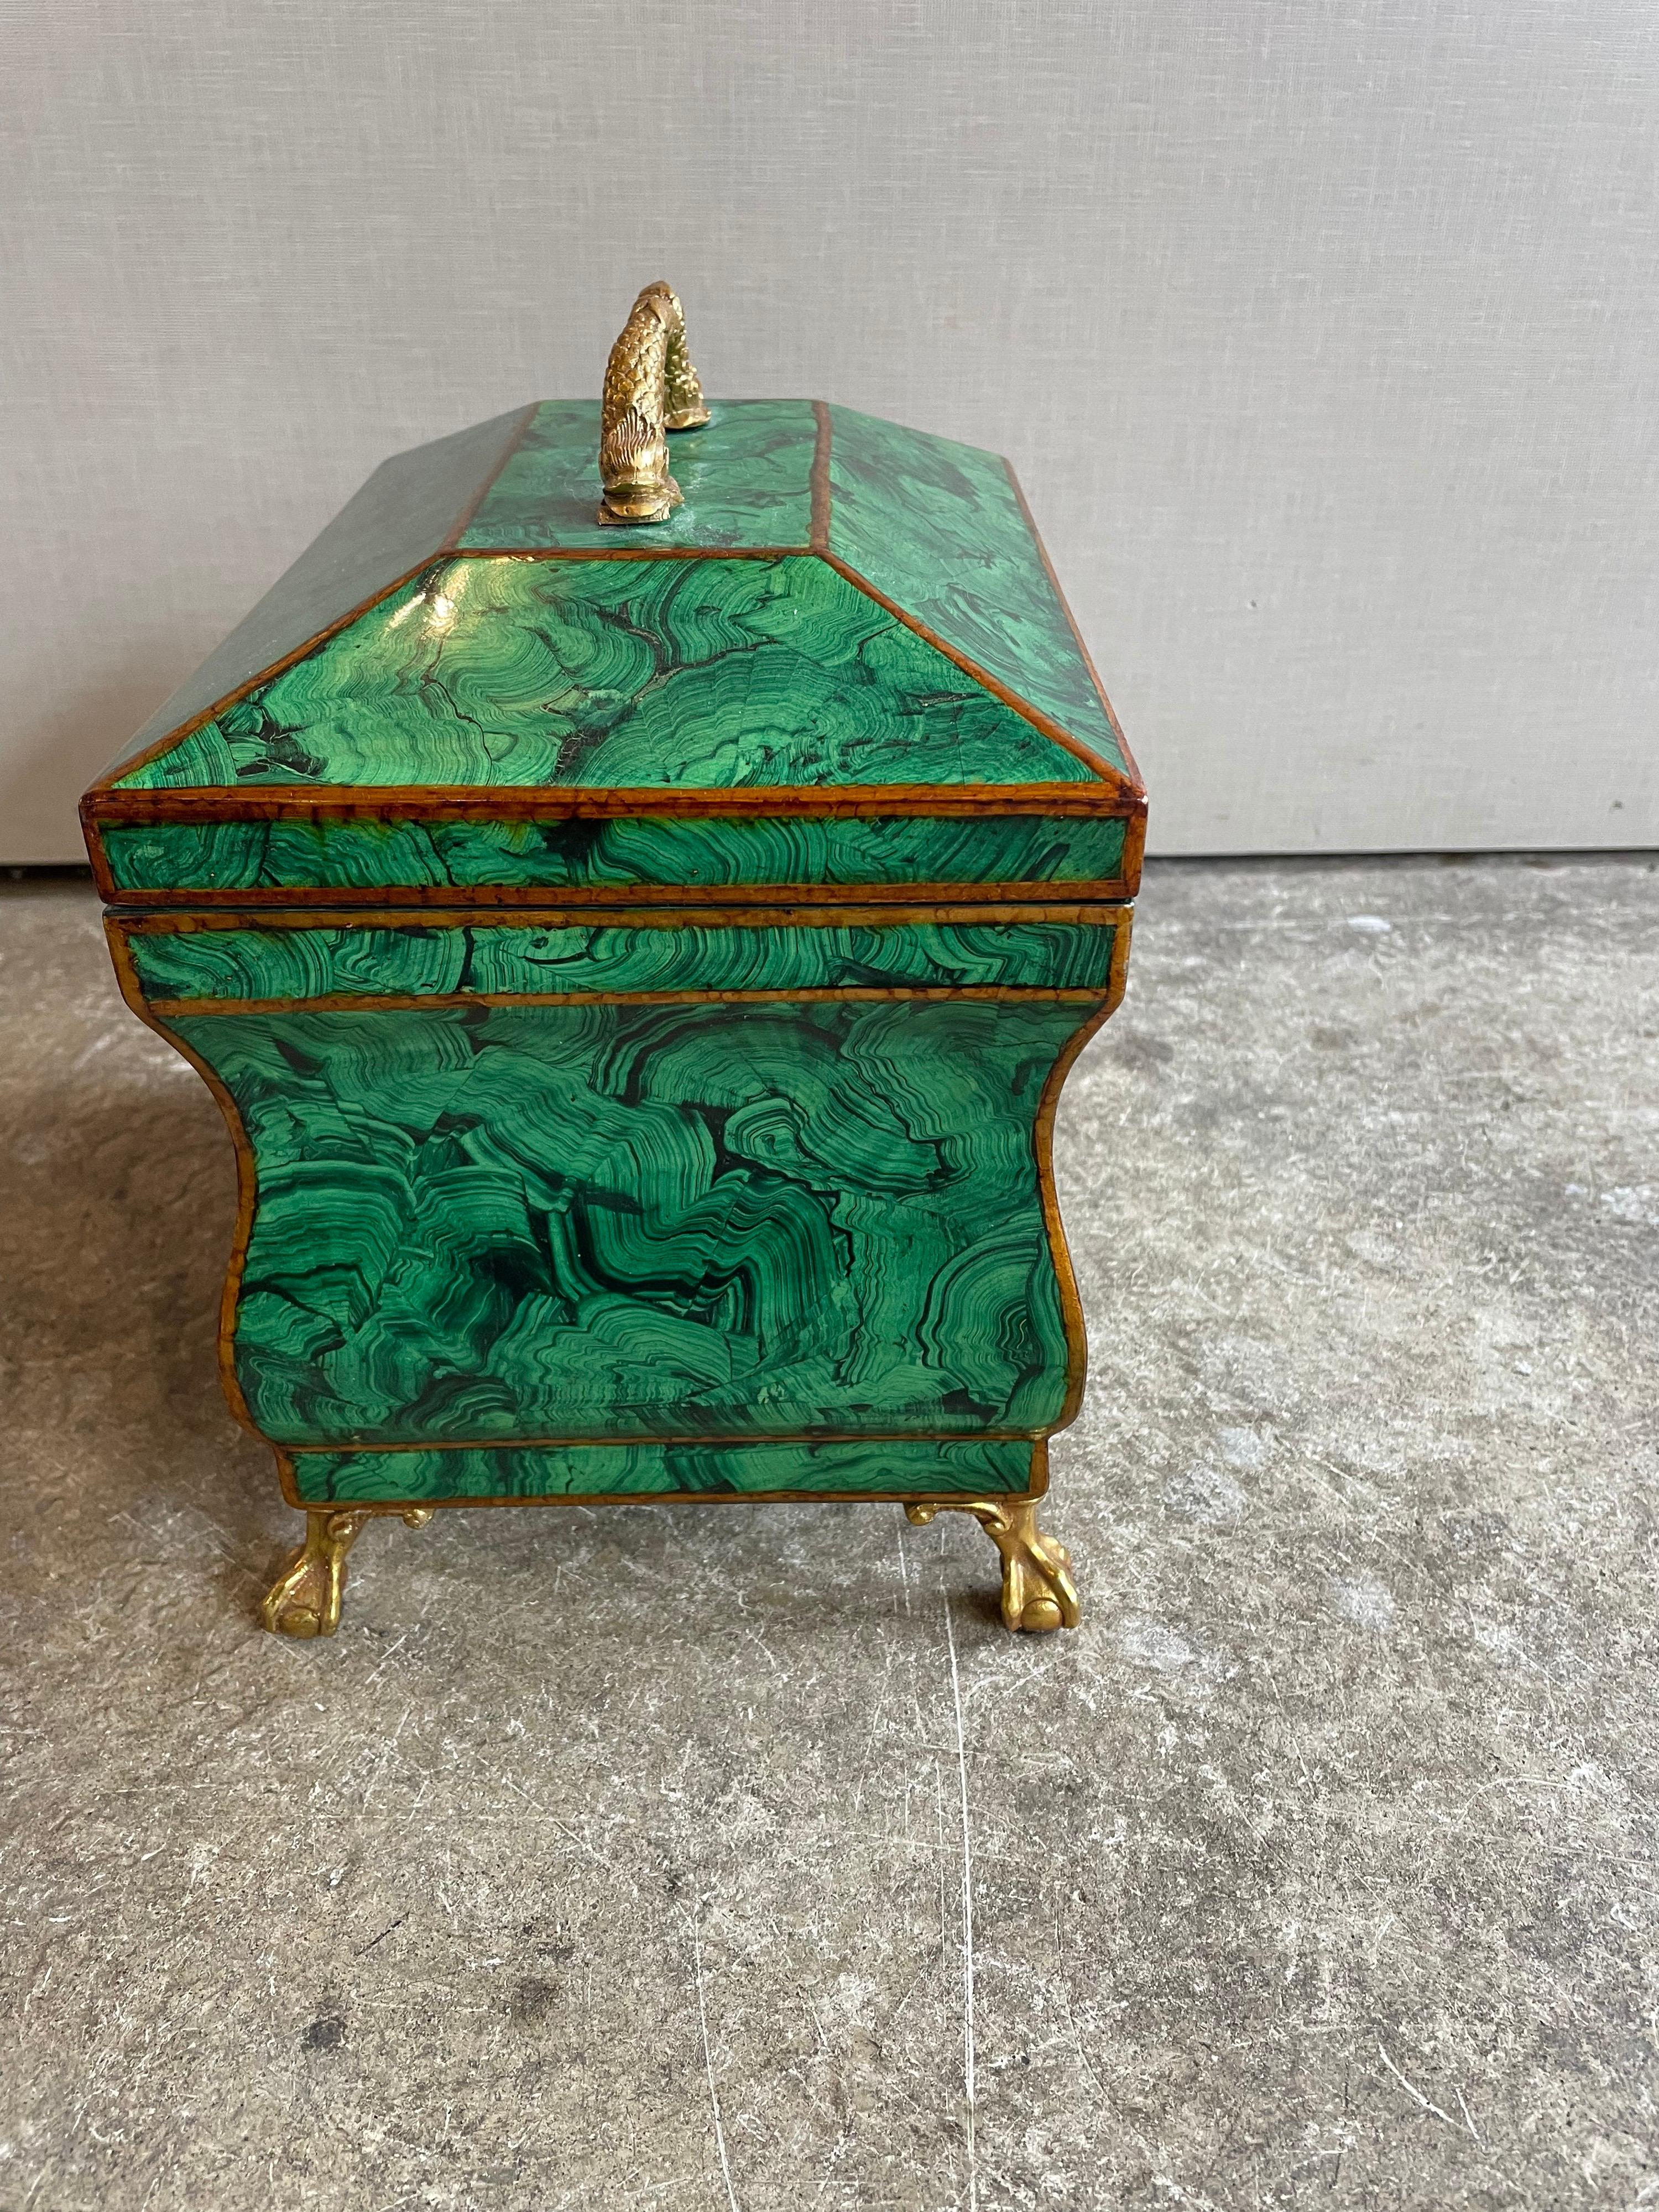 This is a wonderful large faux malachite box with gold handle and feet made by the company Maitland Smith.